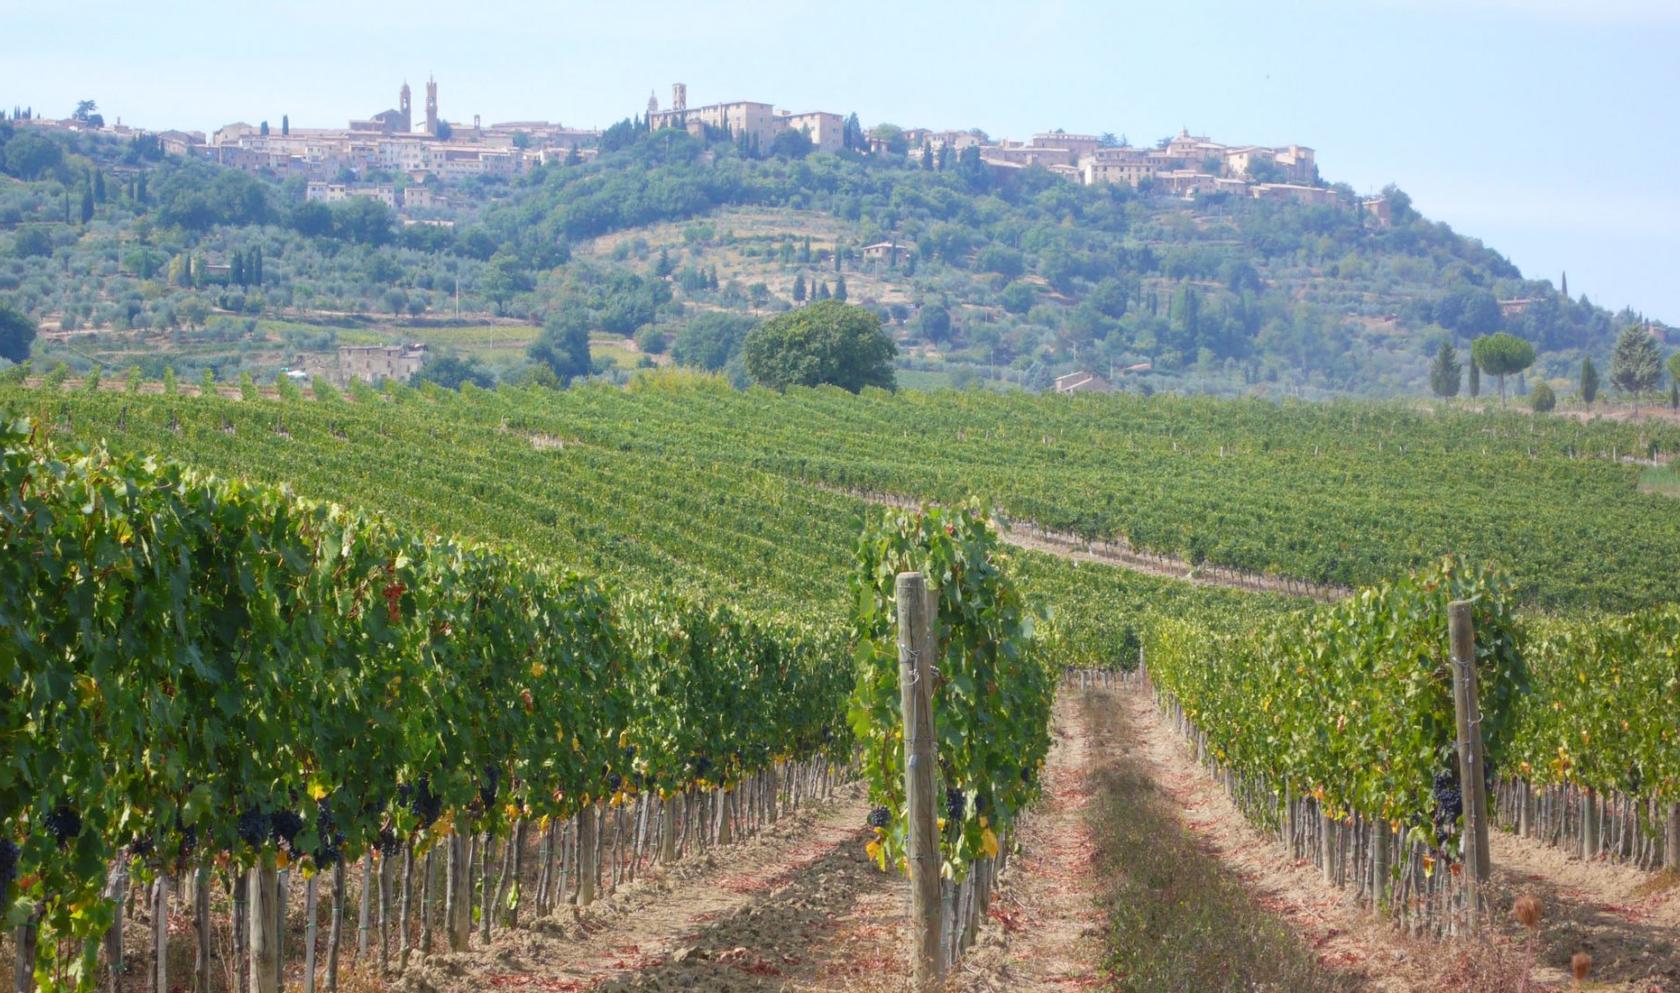 Toscana Immobiliare - winery with Brunello wine production for sale in Montalcino, Tuscany